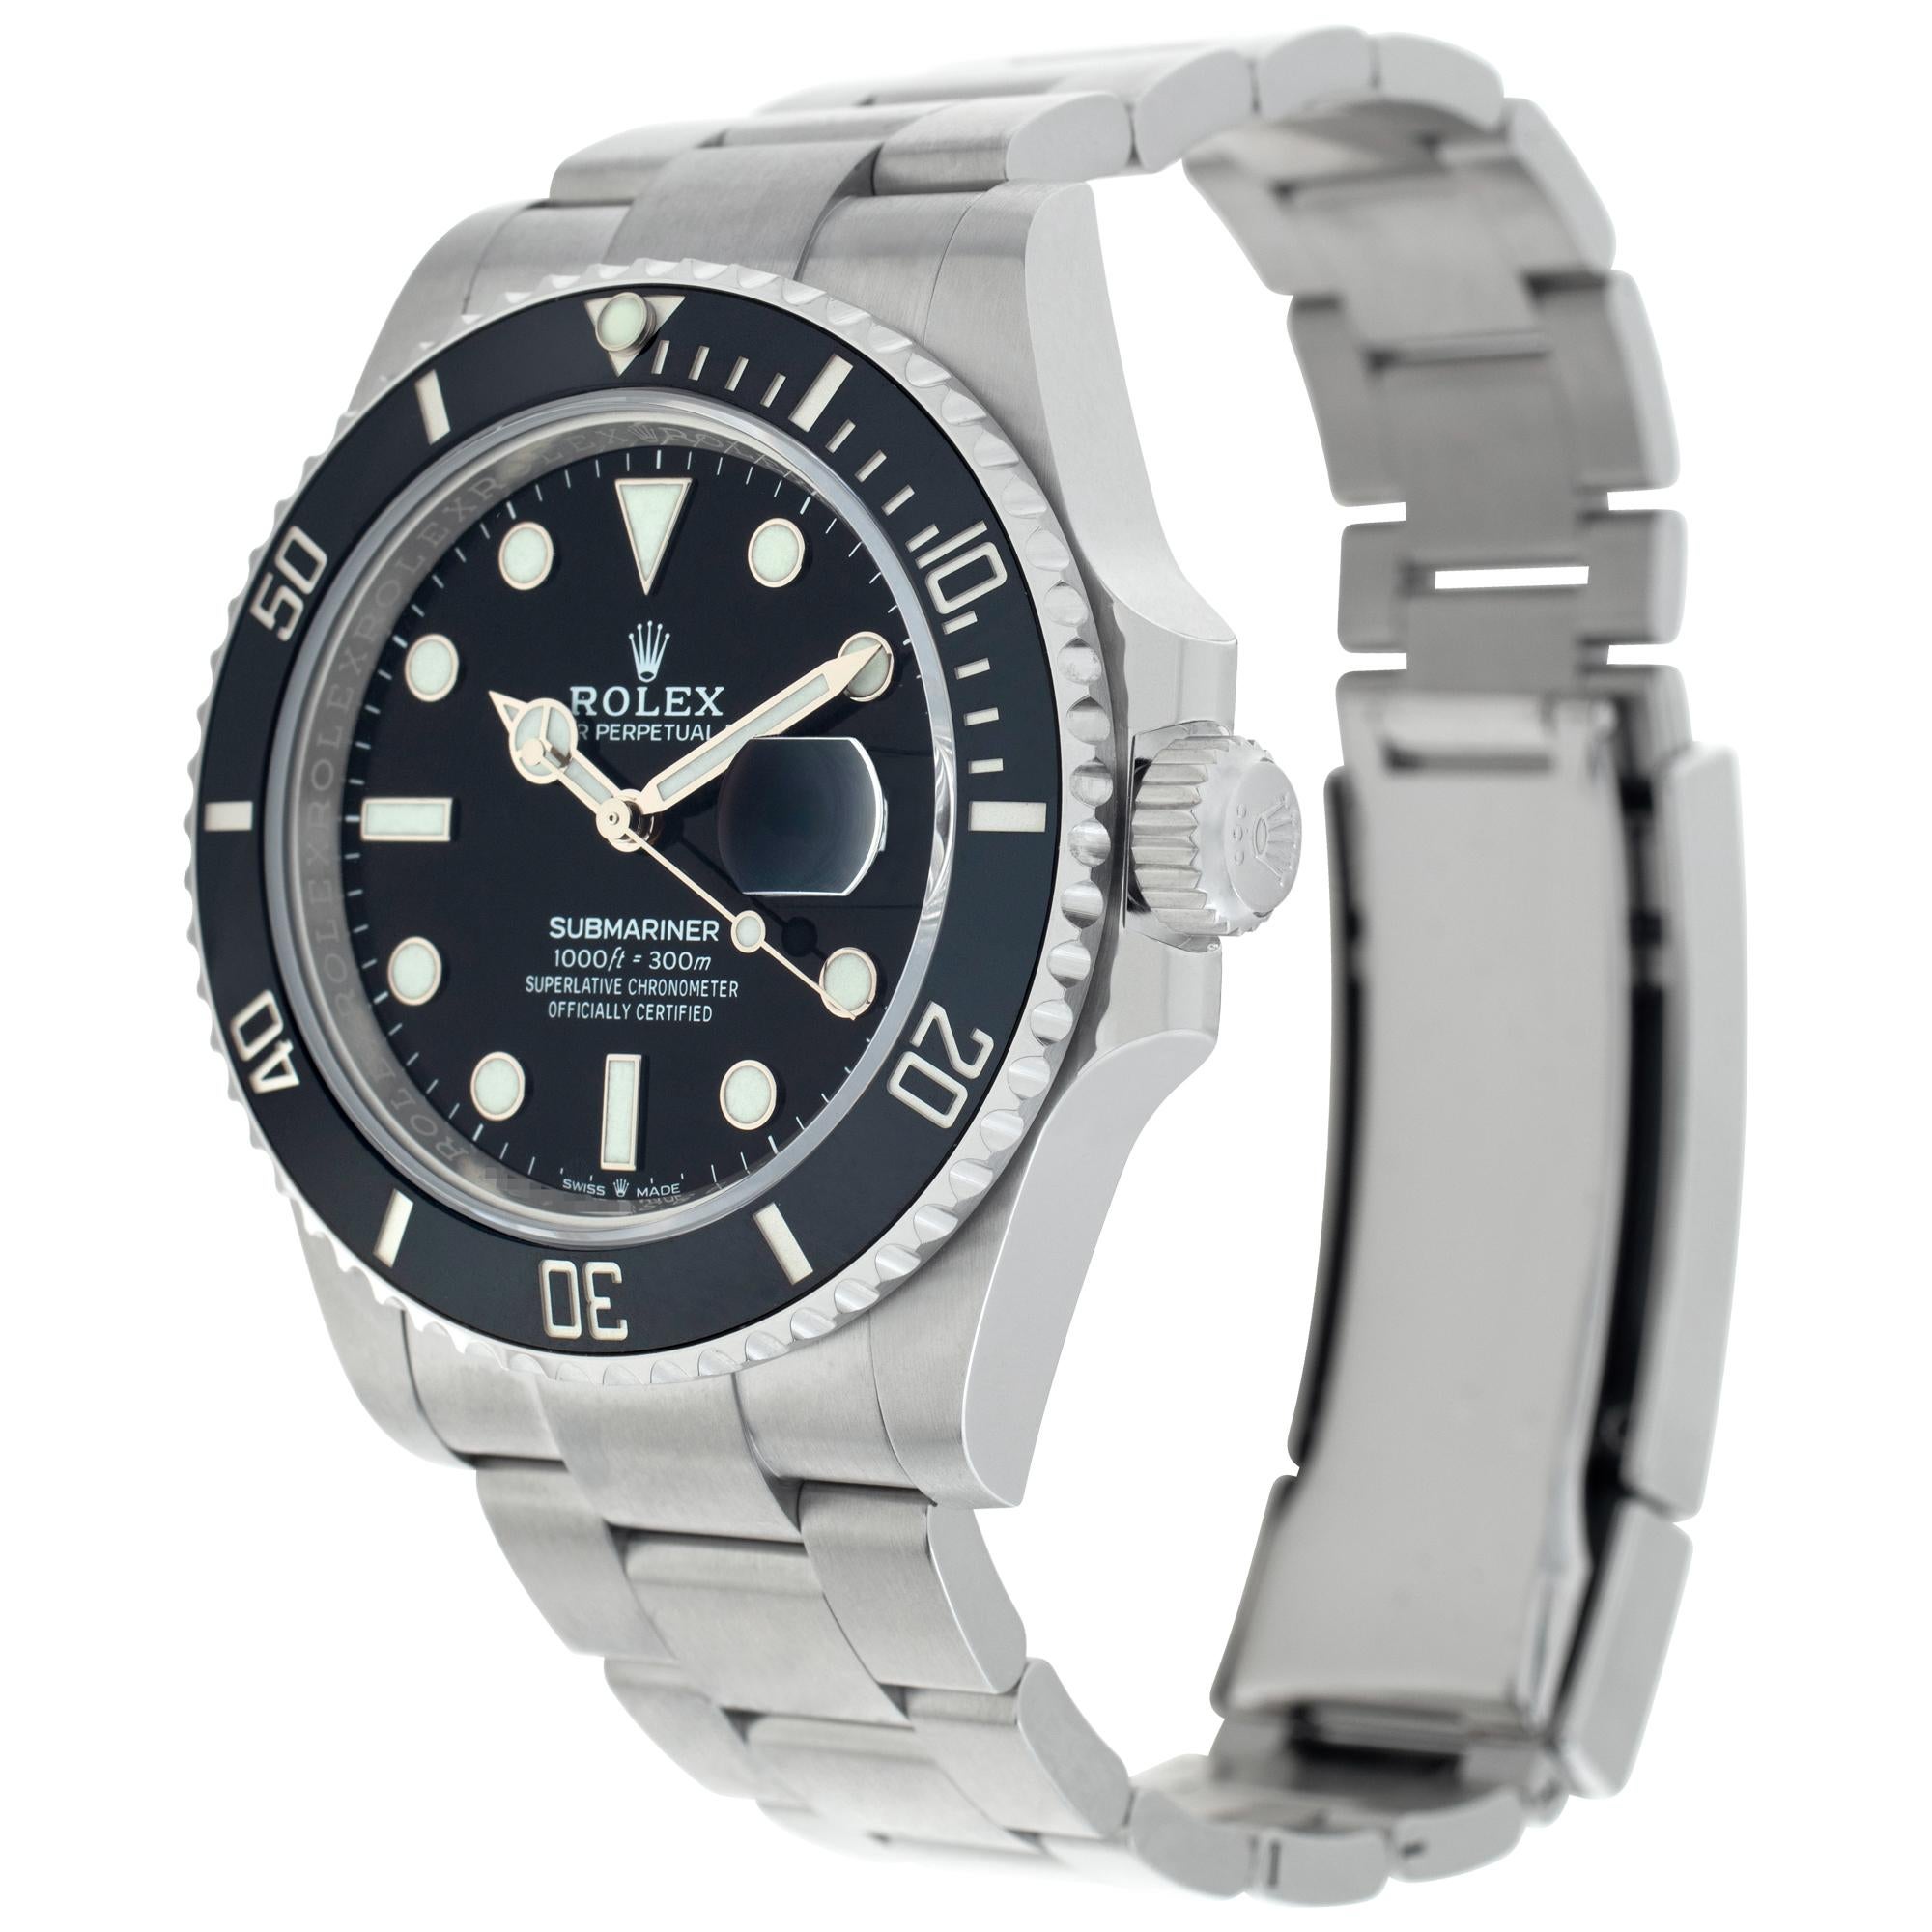 Unused Rolex Submariner in stainless steel with ceramic bezel. Auto w/ sweep seconds and date. 41 mm case size. Unused with box and papers dated May 2022. **Bank wire only at this price** Ref 126610ln. Fine Unused Rolex Watch. Unused Sport Rolex